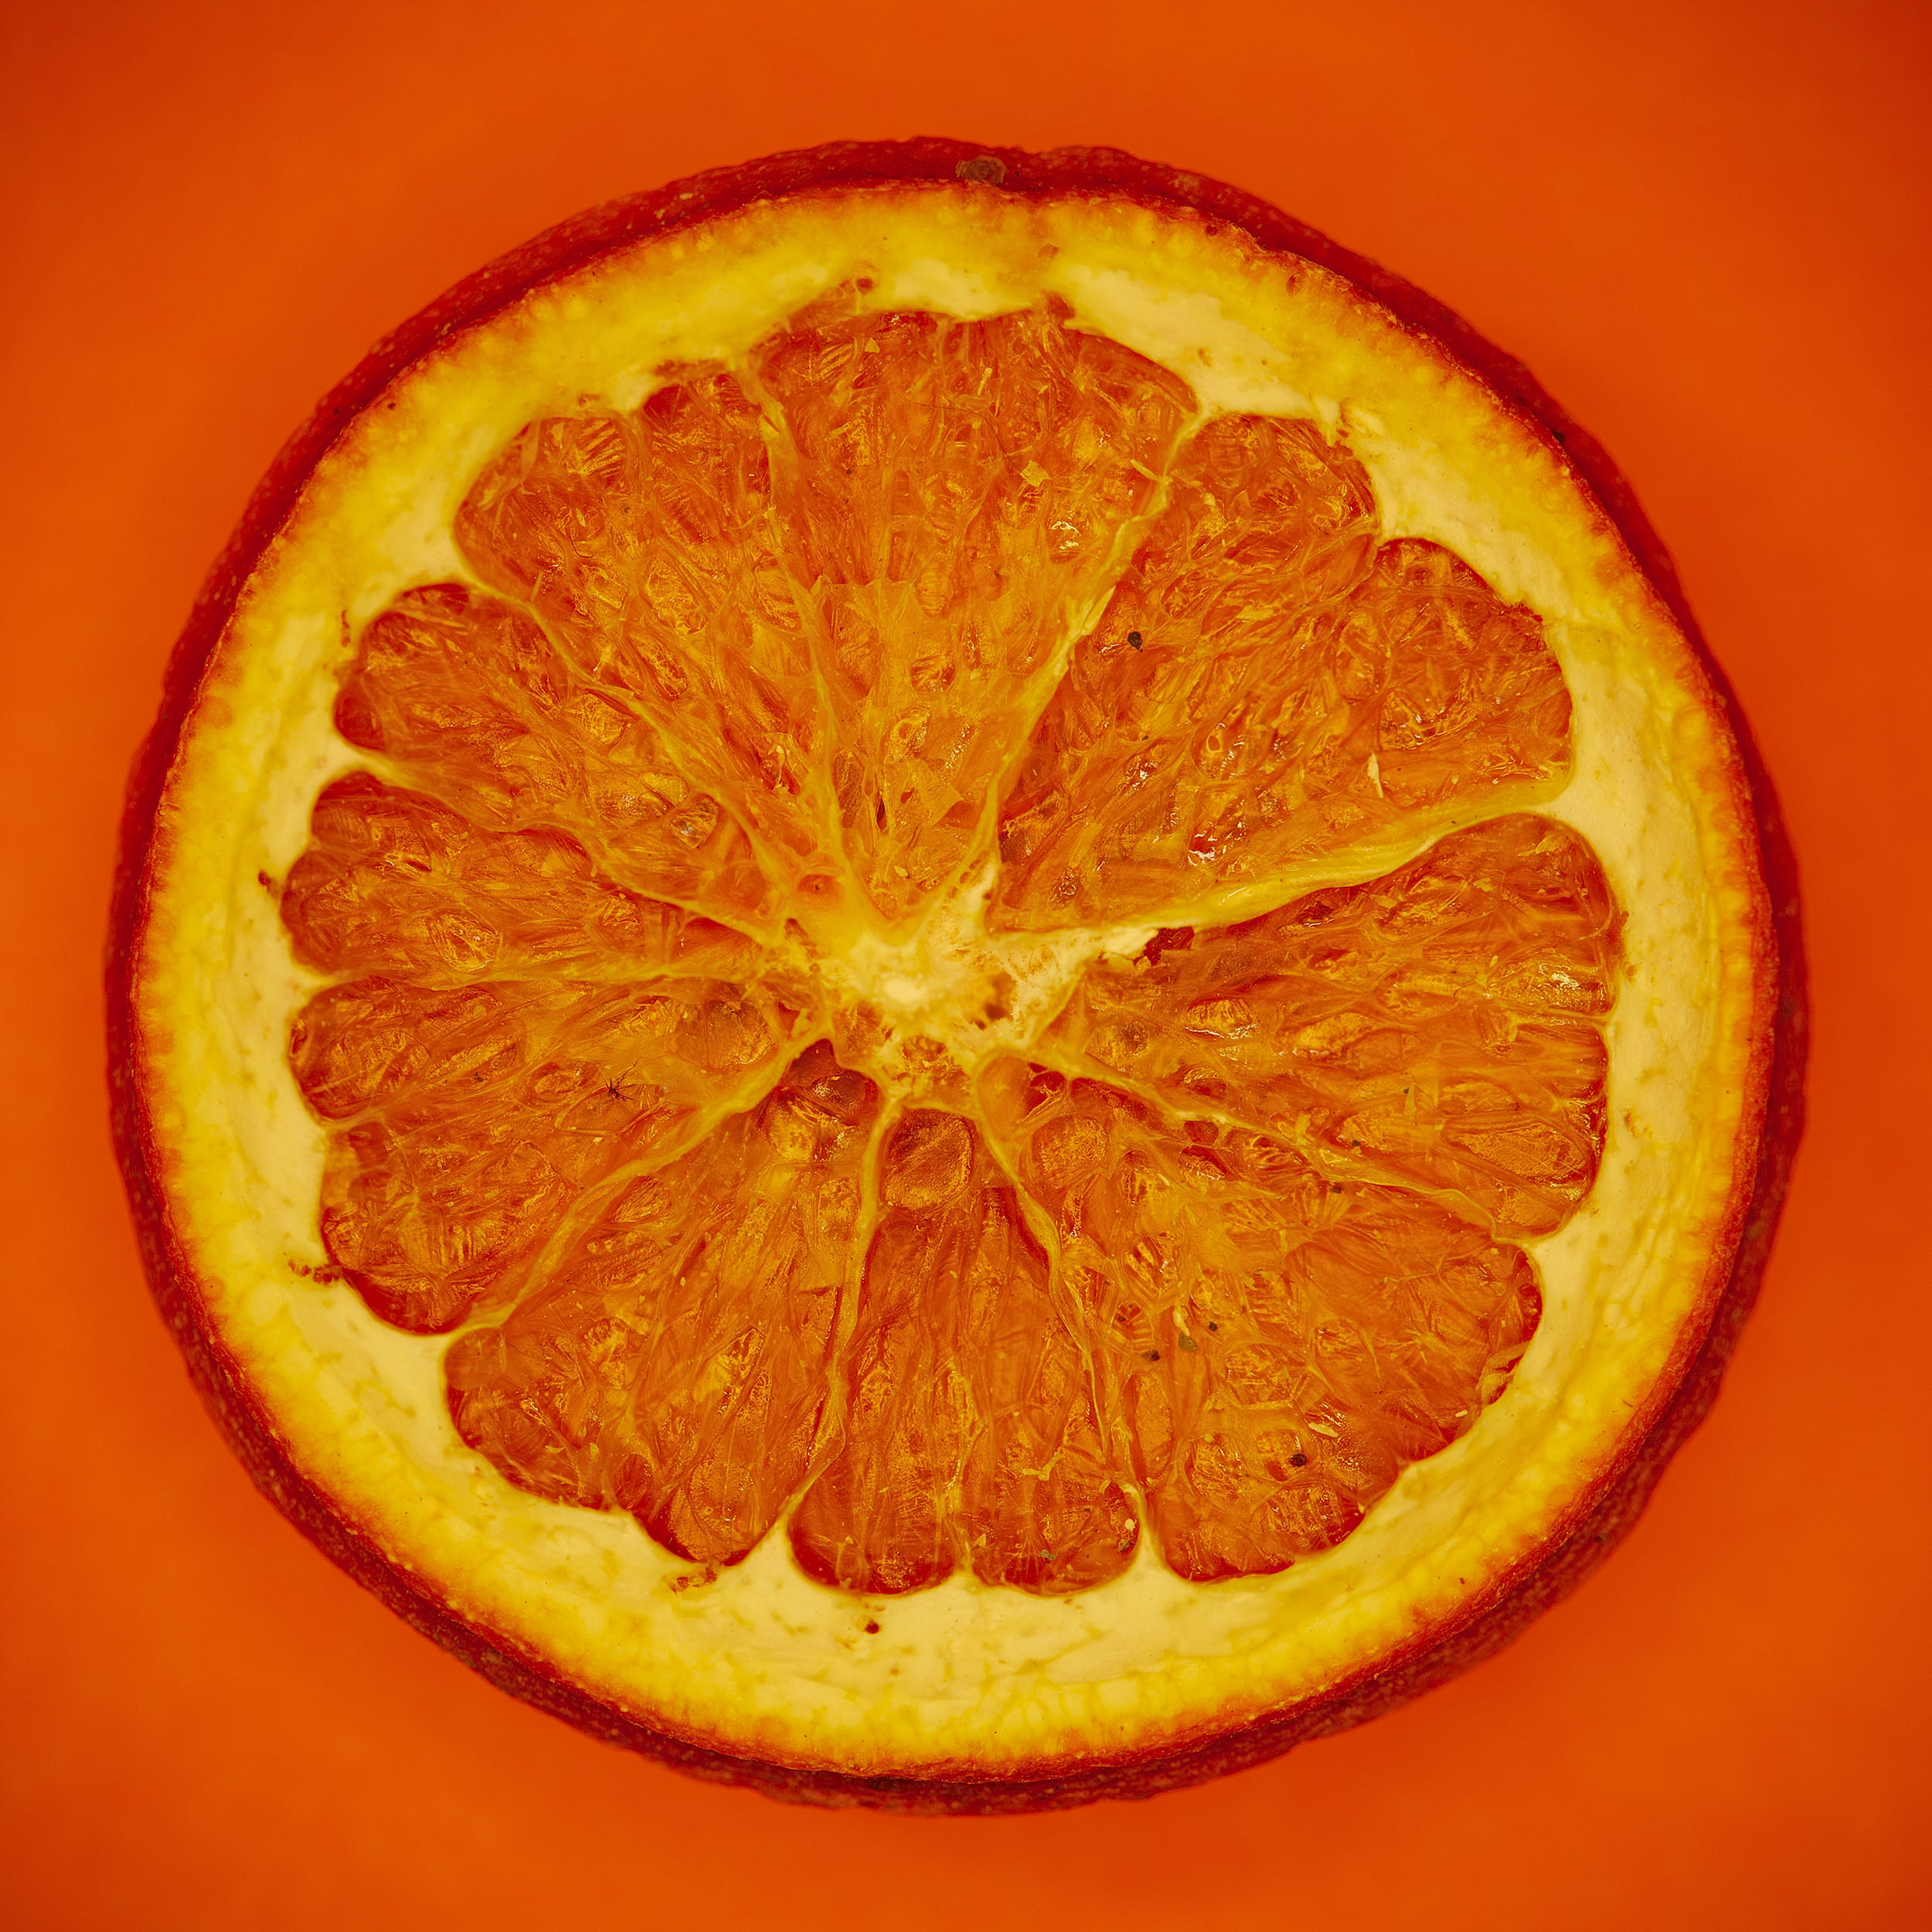 Photograph by Rhianna Cleaveley showing a dried slice of orange on an orange background.